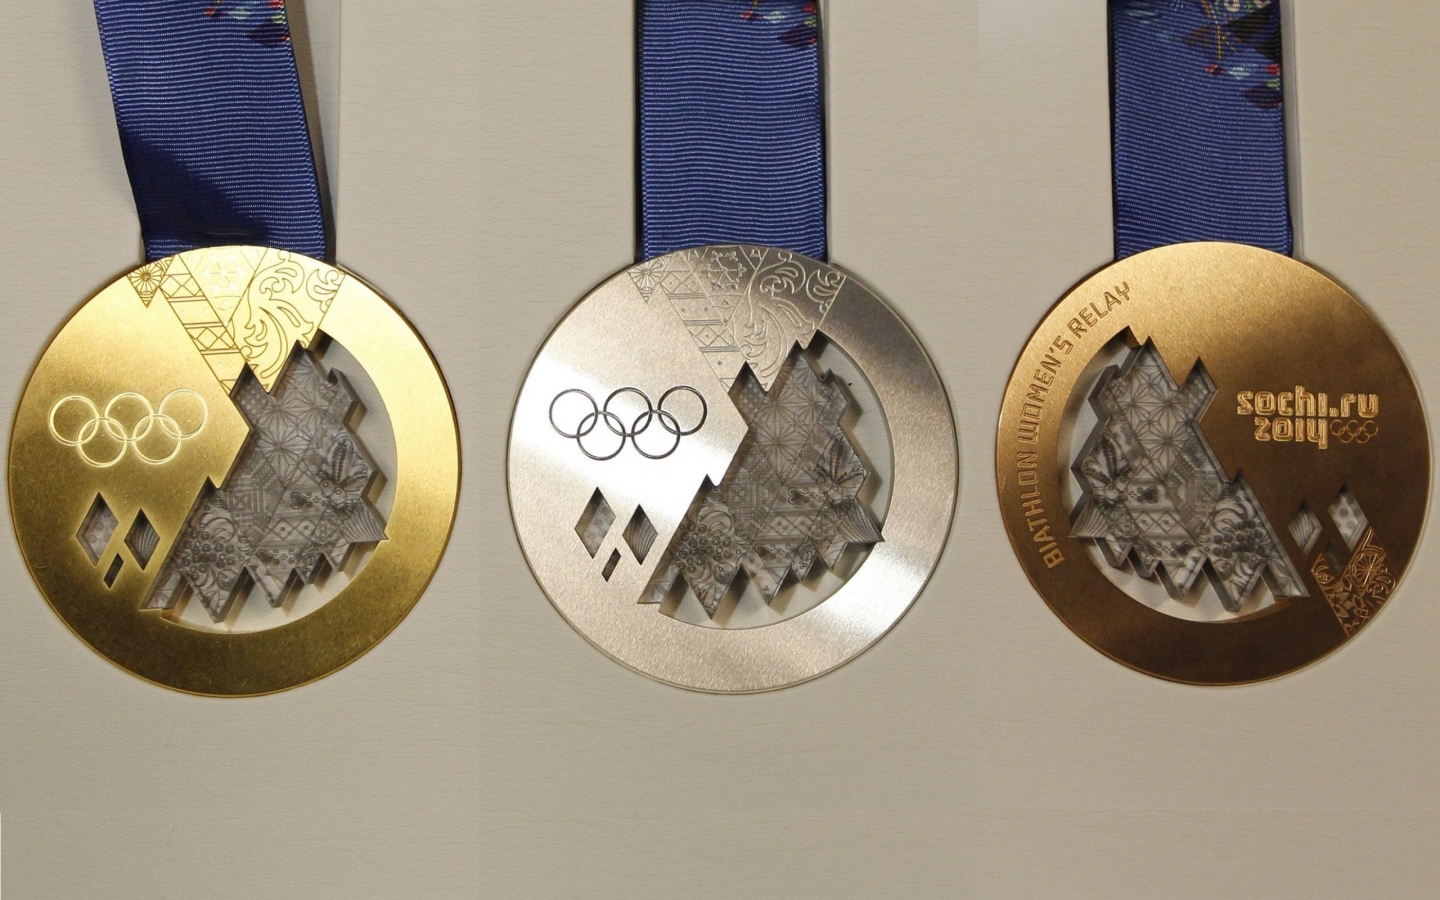 Sochi 2014 Medals for 1440 x 900 widescreen resolution